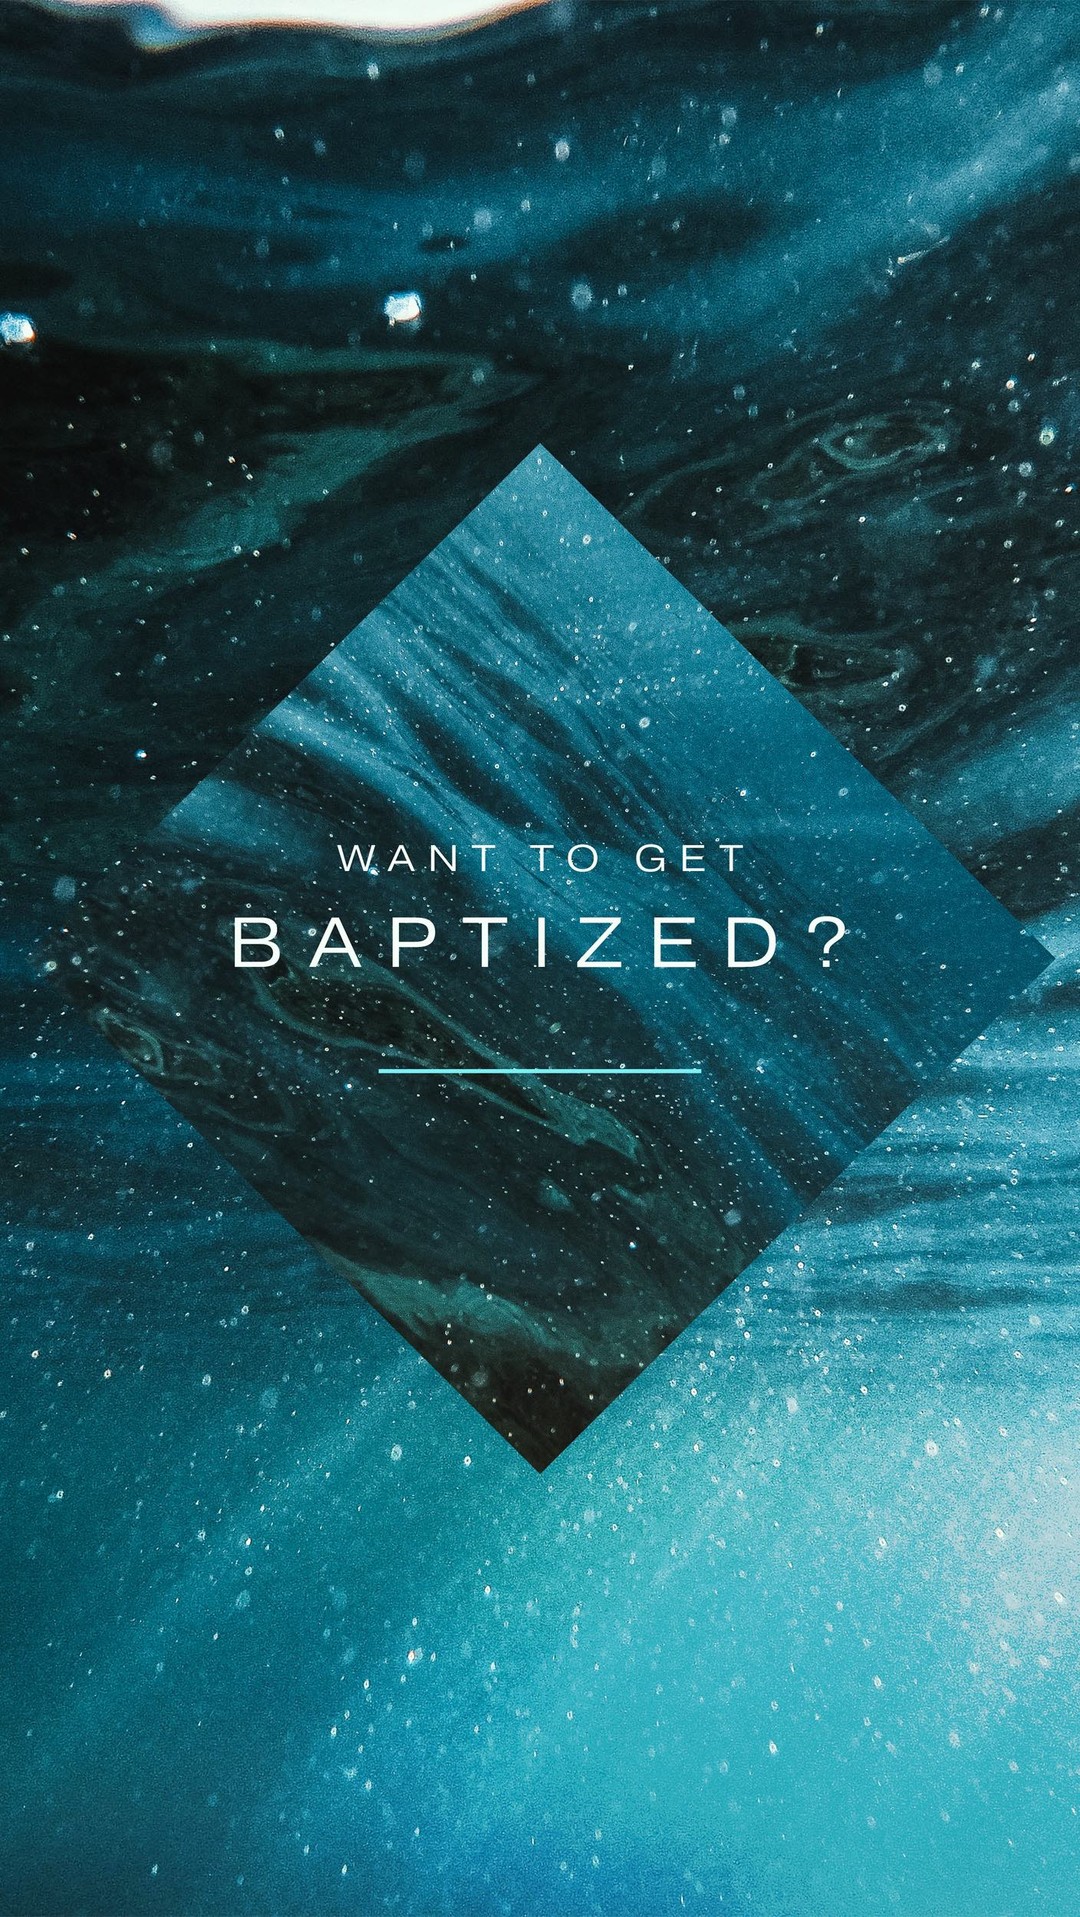 Would you like to be baptized? Our next Baptism service is Feb. 6. Call the church office or go to our website to schedule your baptism meeting with a pastor or ministry leader by January 30. 
https://fellowshipwaco.org/resources-and-tools/baptism/.